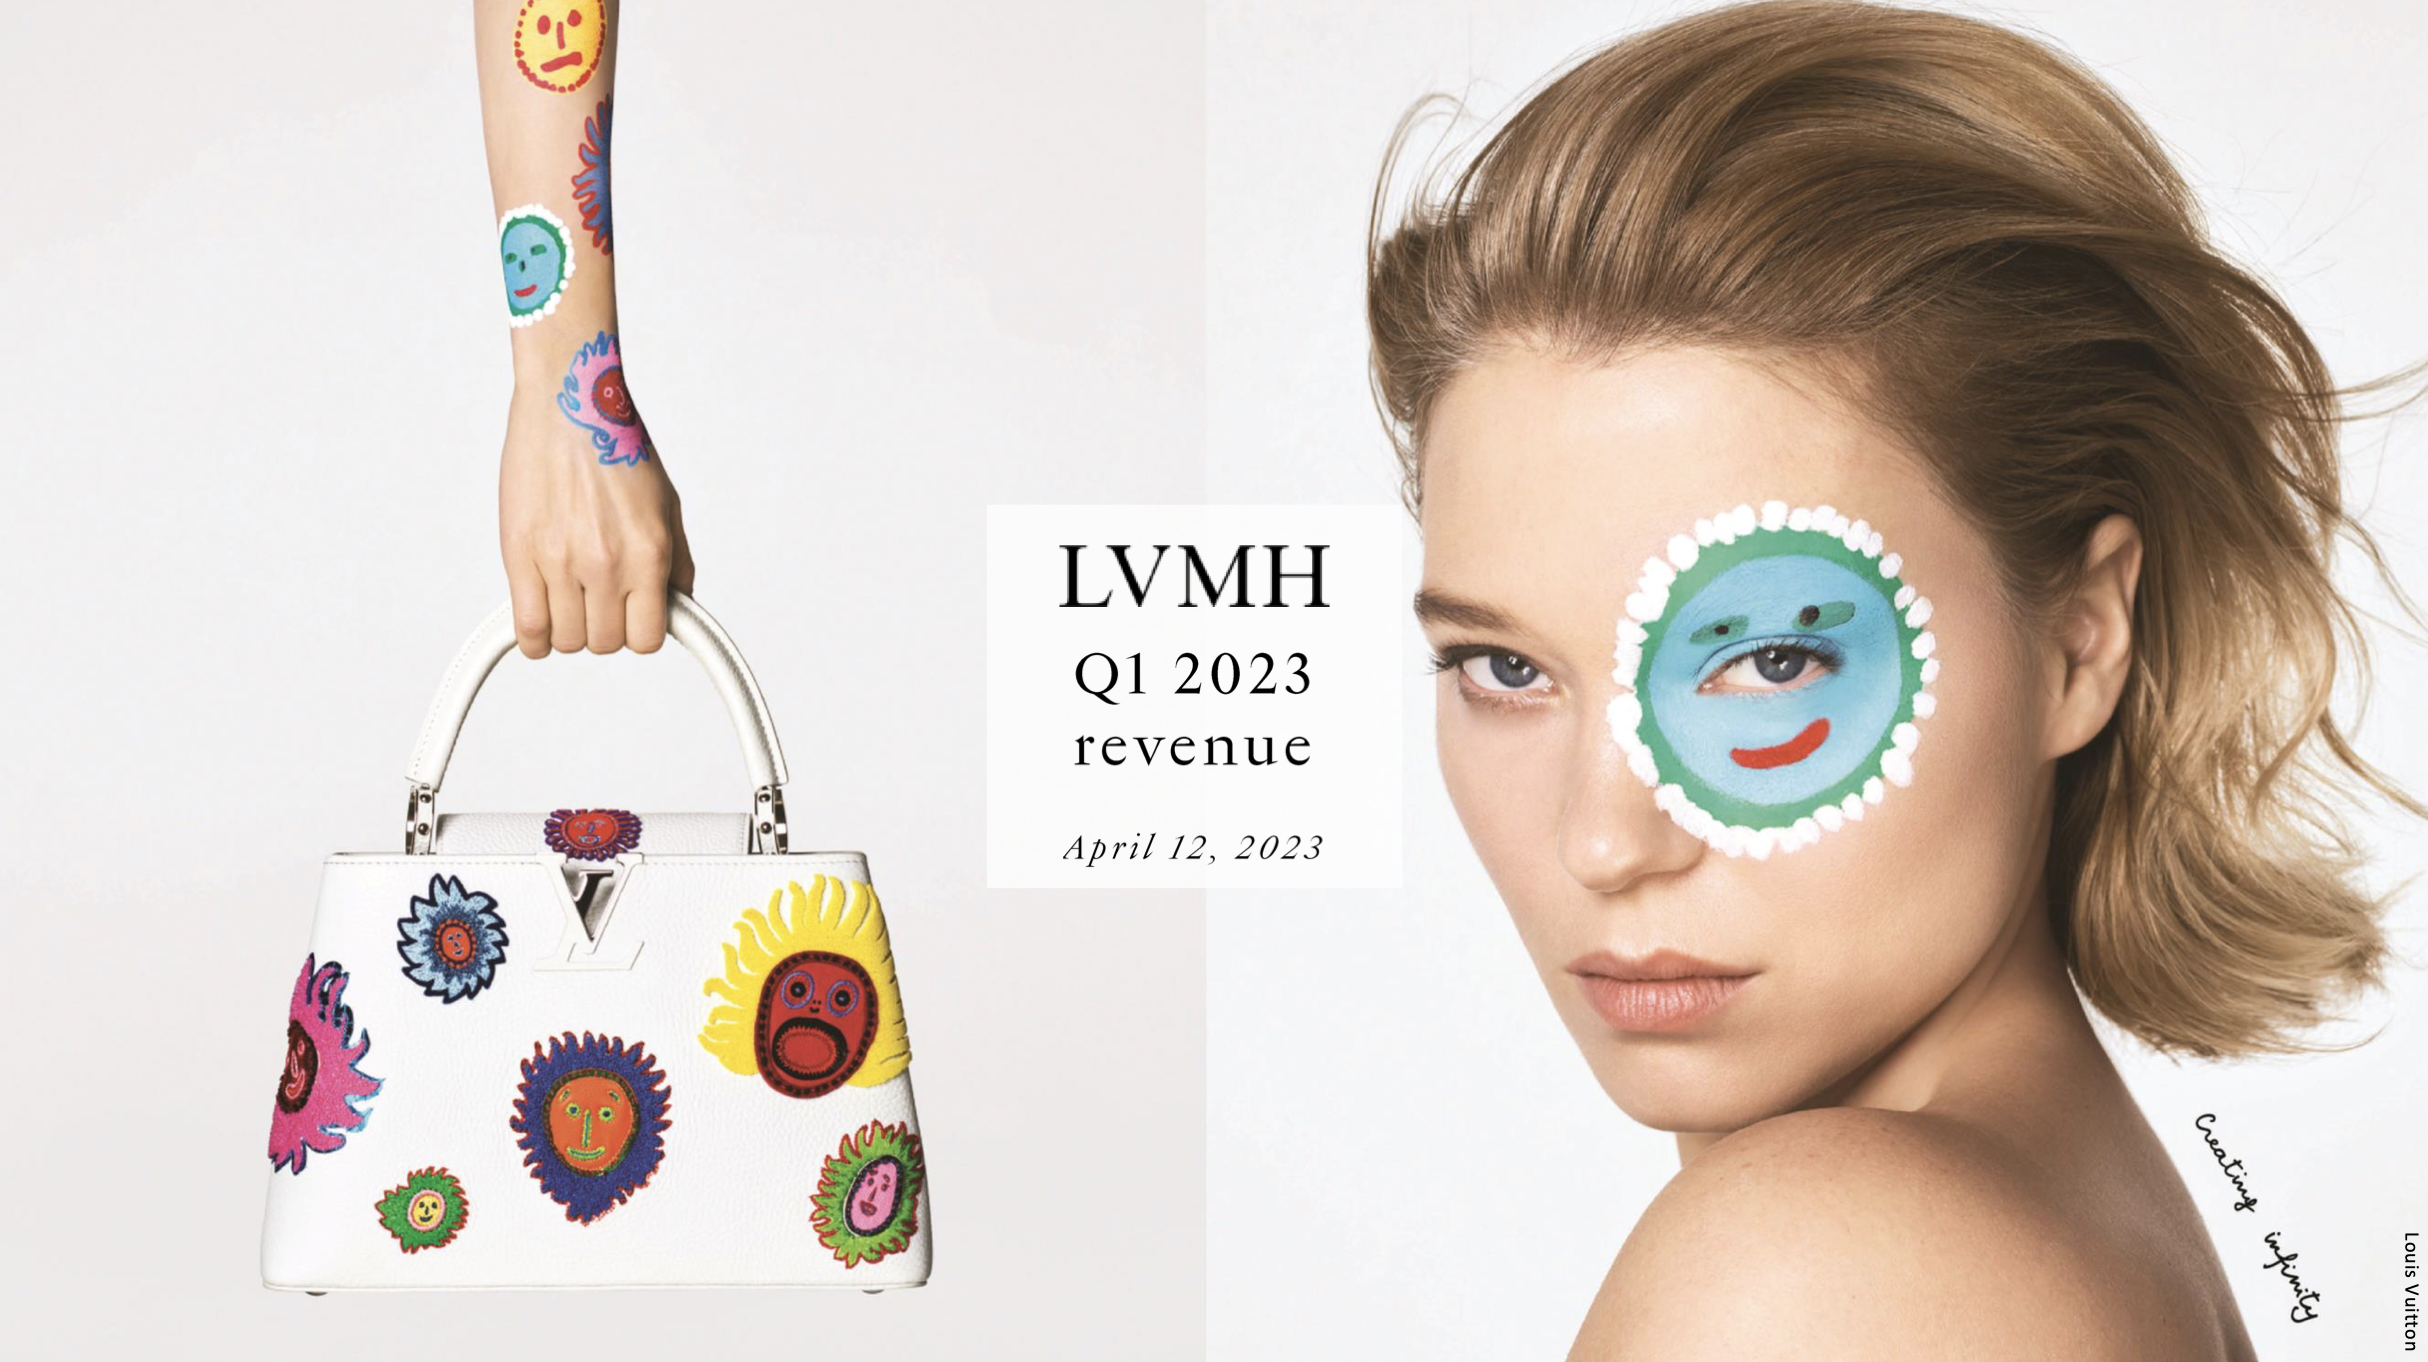 “Extremely Optimistic” for Chinese Market! More Important Information Disclosed in LVMH 23 Q1 Earnings Call